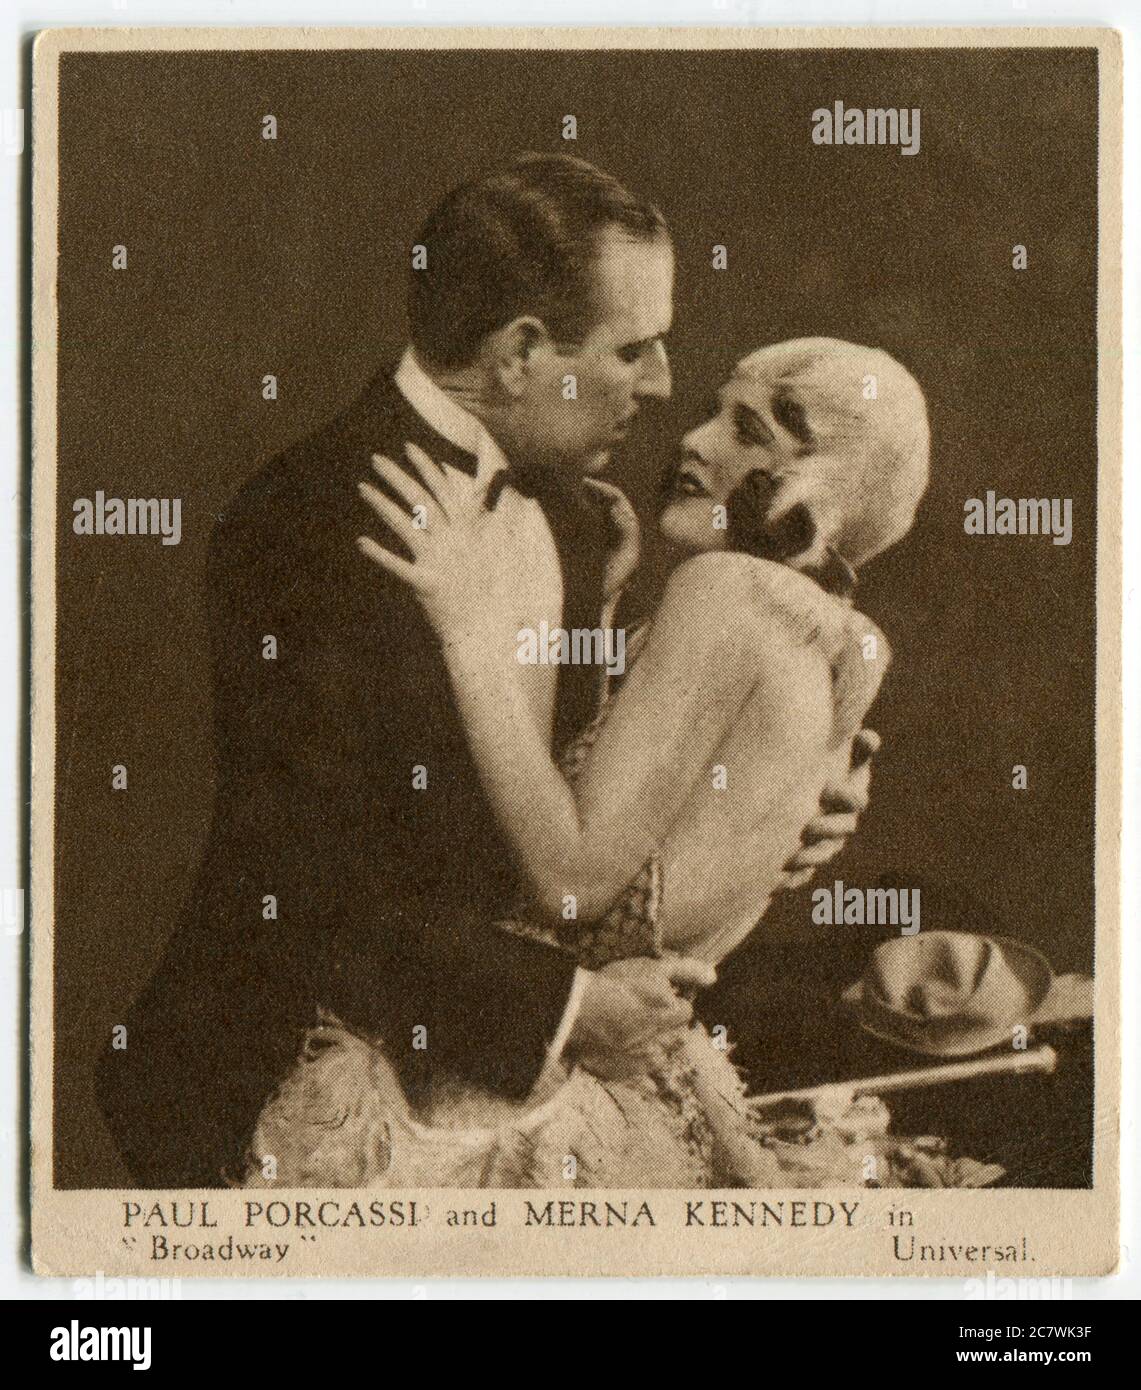 'Love Scenes from Famous Films' Kensitas cigarette card - Paul Porcassi and Merna Kennedy in 'Broadway'. Second series published in 1932 by J. Wix & Sons Ltd. Stock Photo